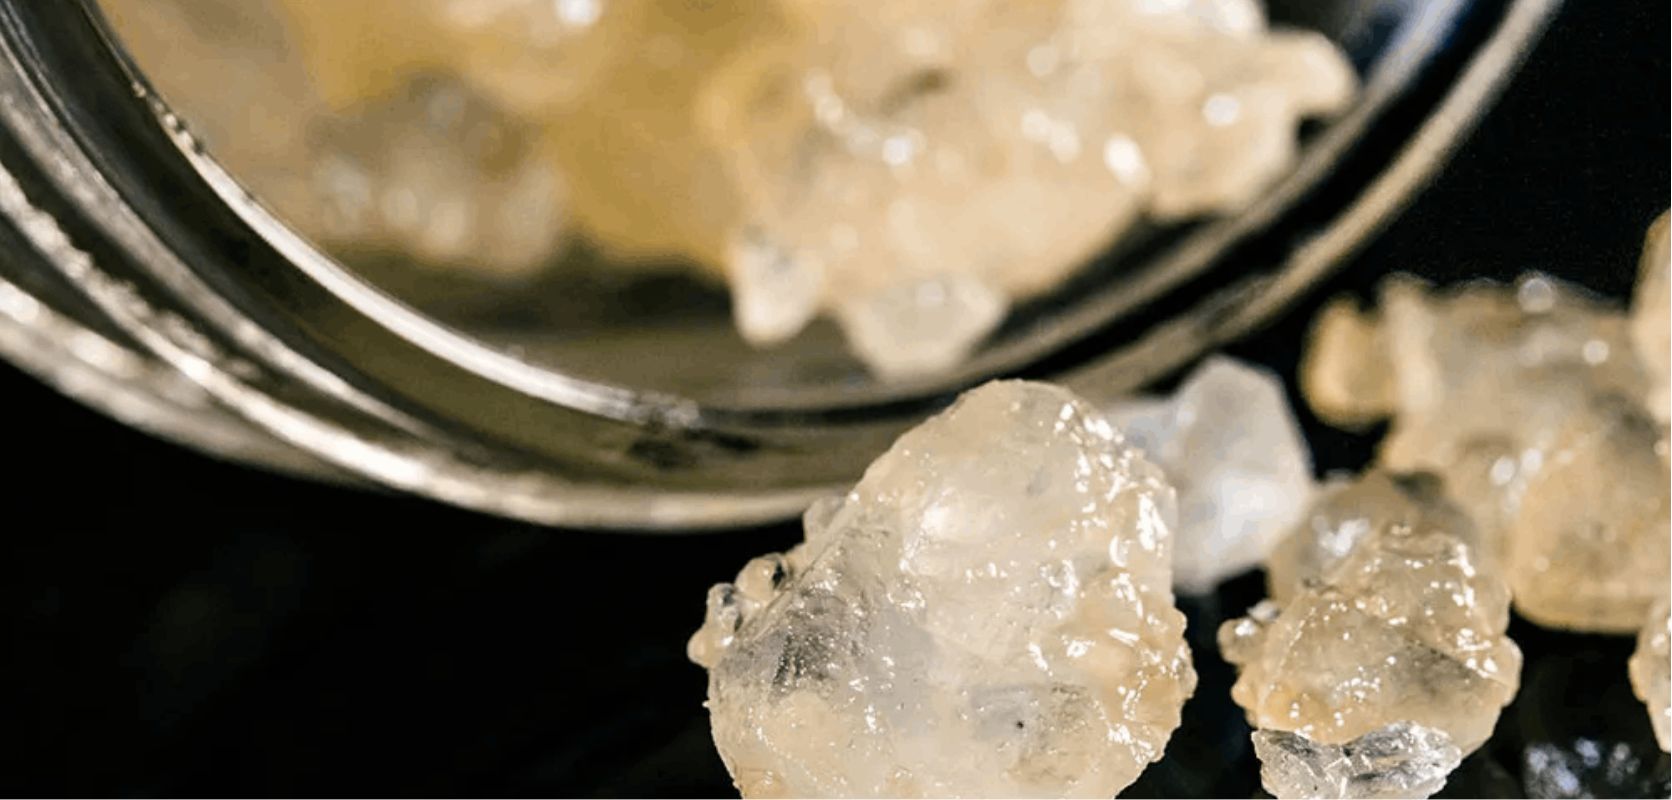 At our online dispensary in Canada, we take pride in offering some of the best Cannabis Diamonds products in the market.